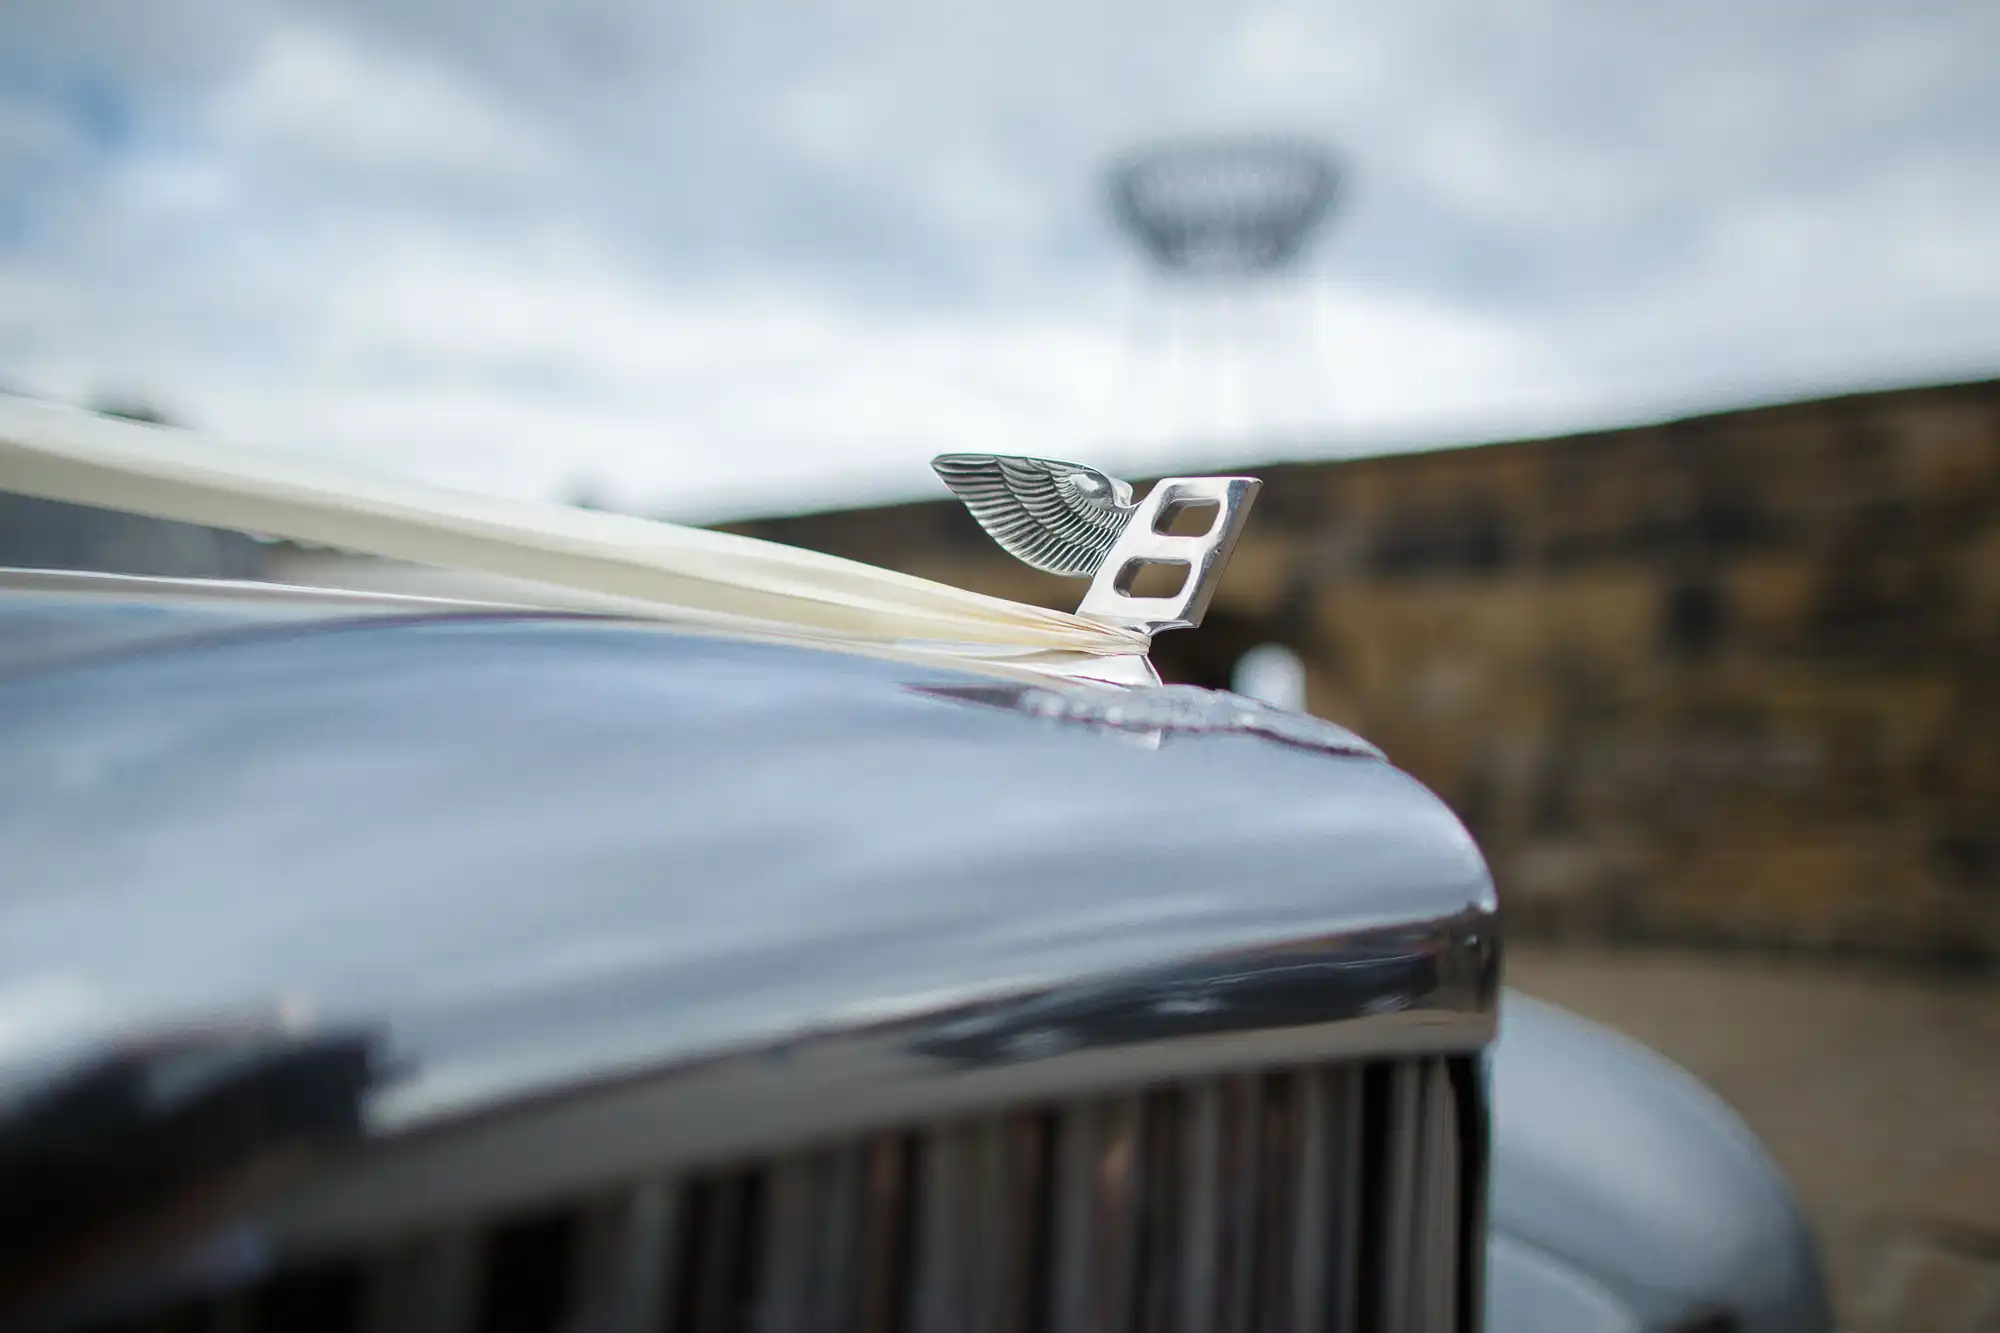 Close-up of a vintage car's hood ornament and grille, with a blurred background of a tower-like structure.